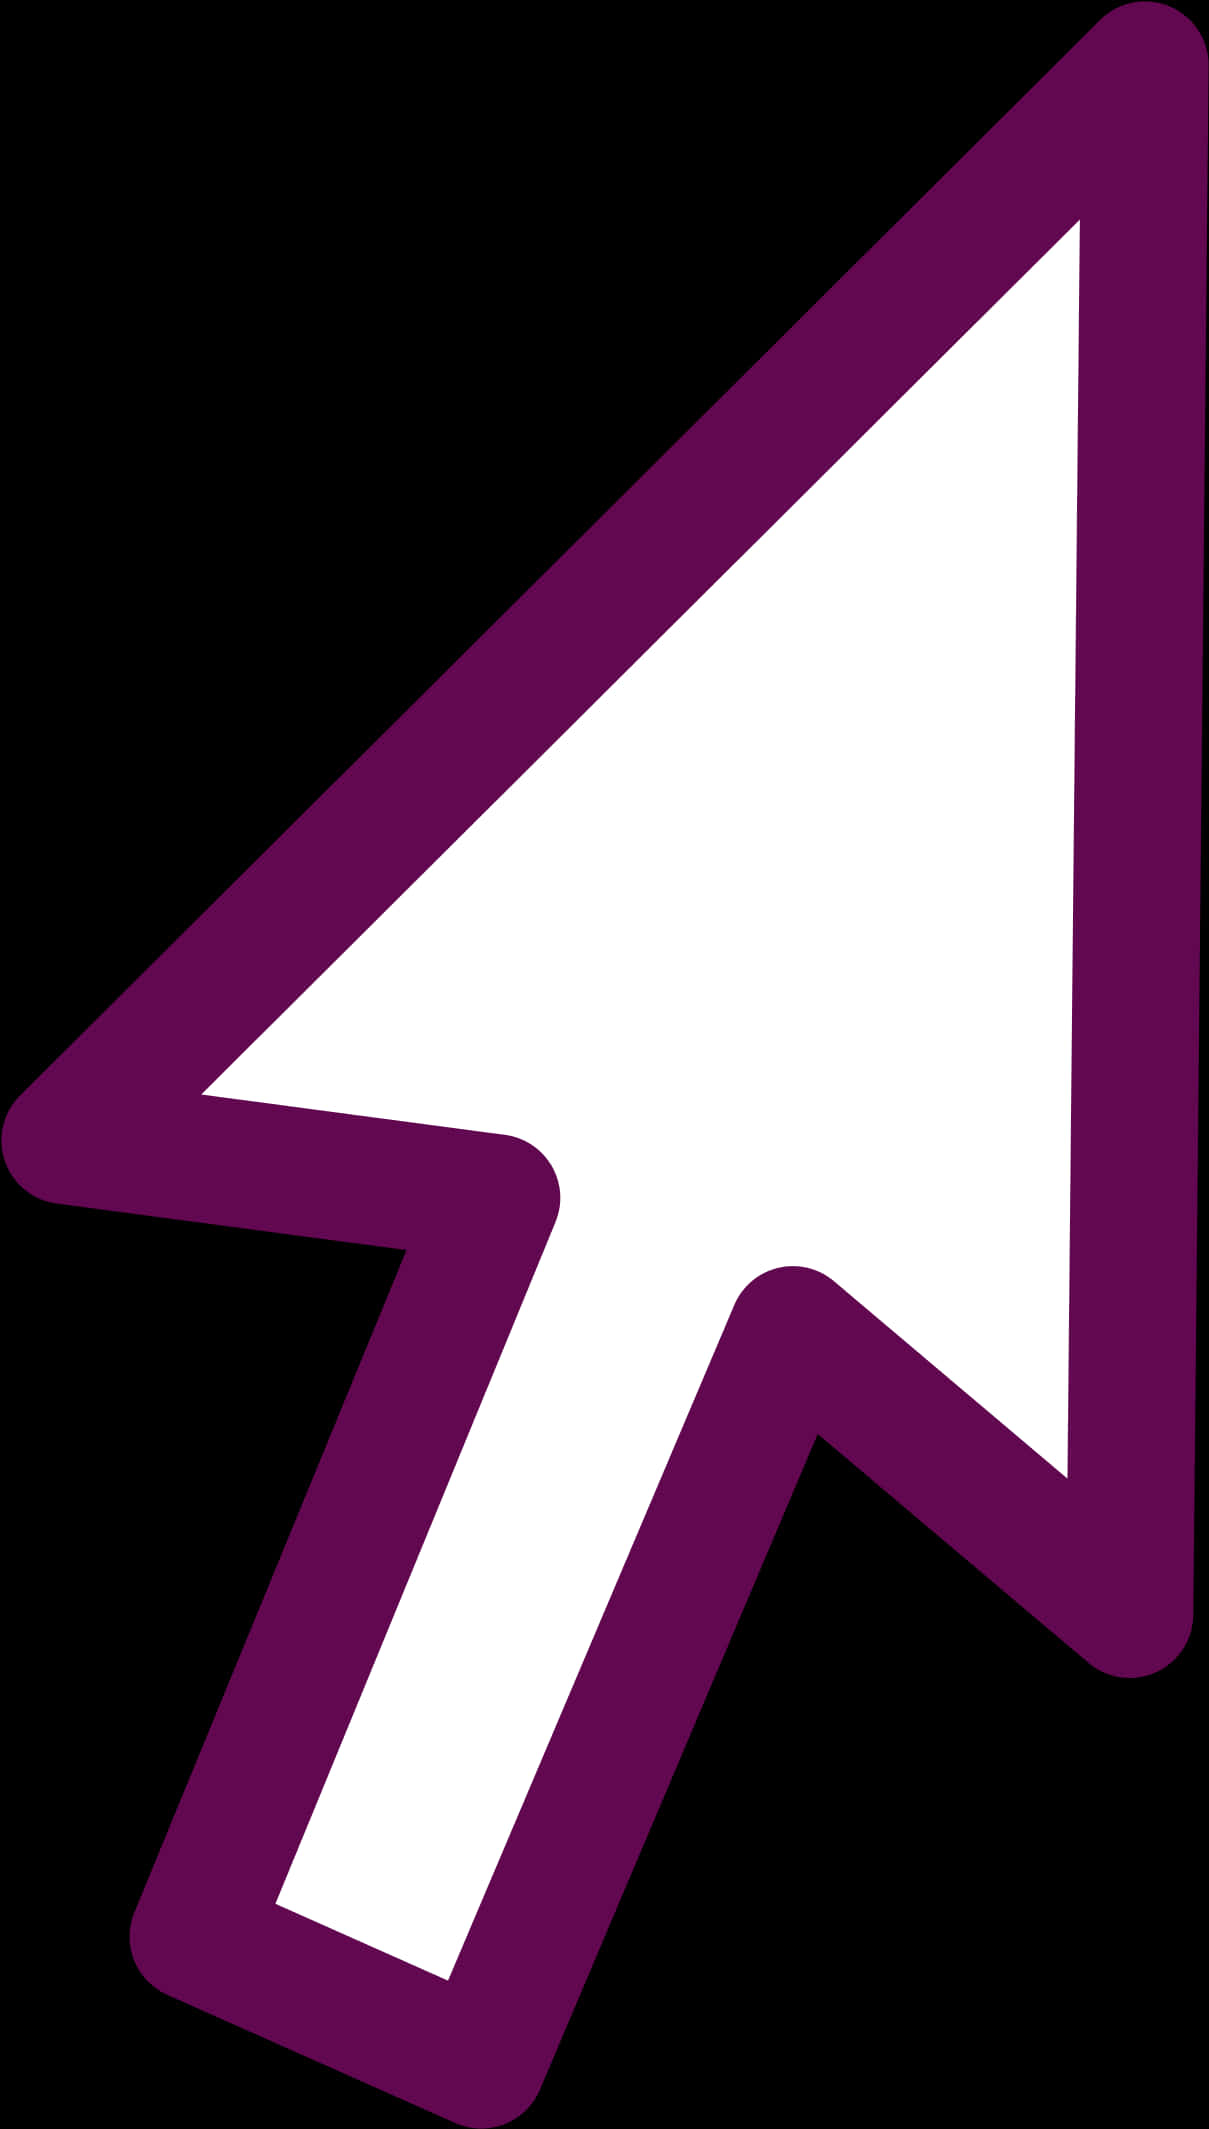 A Purple And White Arrow Pointing Towards The Camera